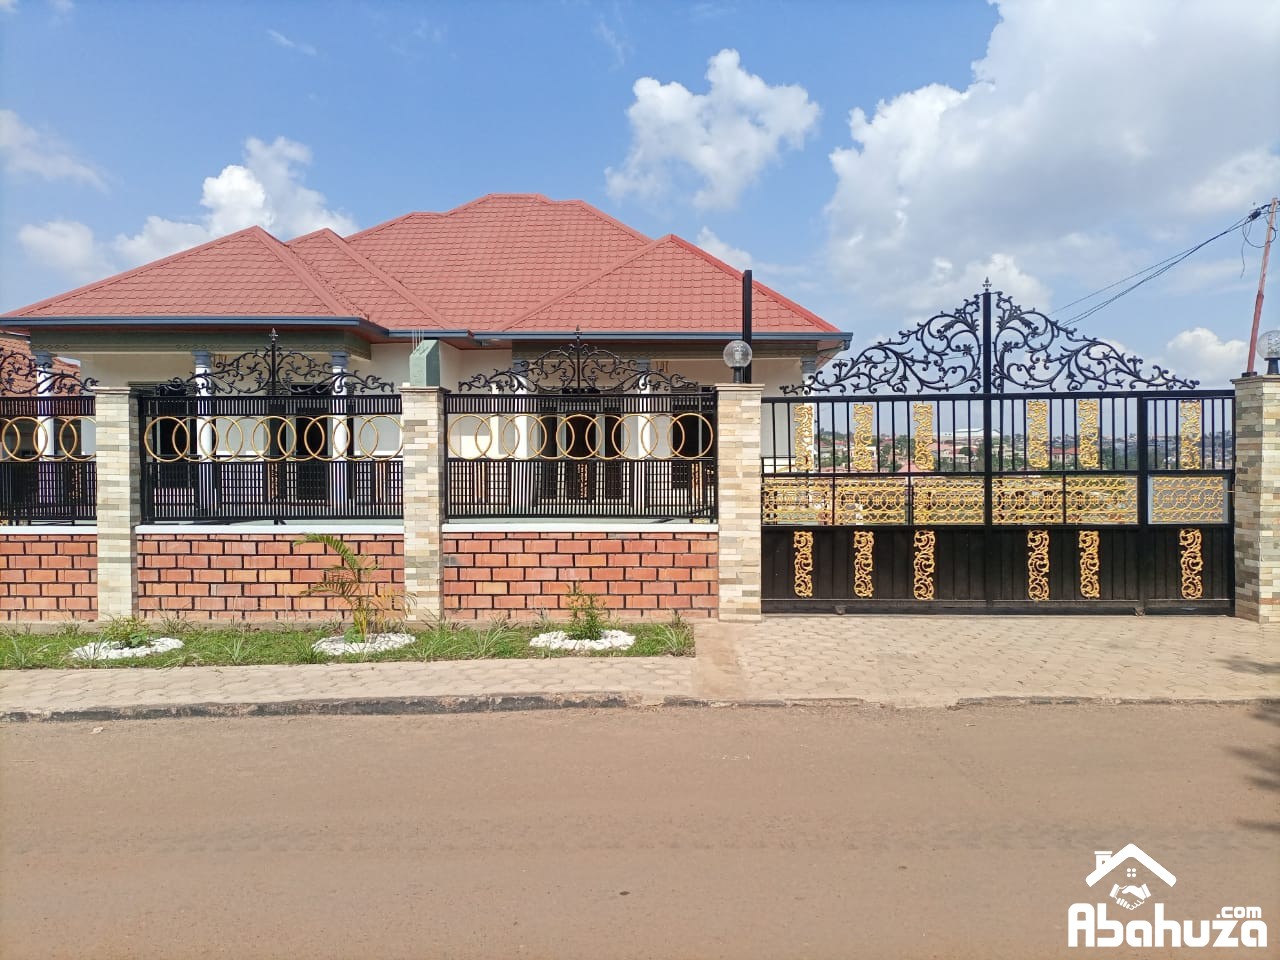 A NEW FURNISHED 4 BEDROOM HOUSE FOR RENT IN KIGALI AT KICUKIRO-NIBOYE